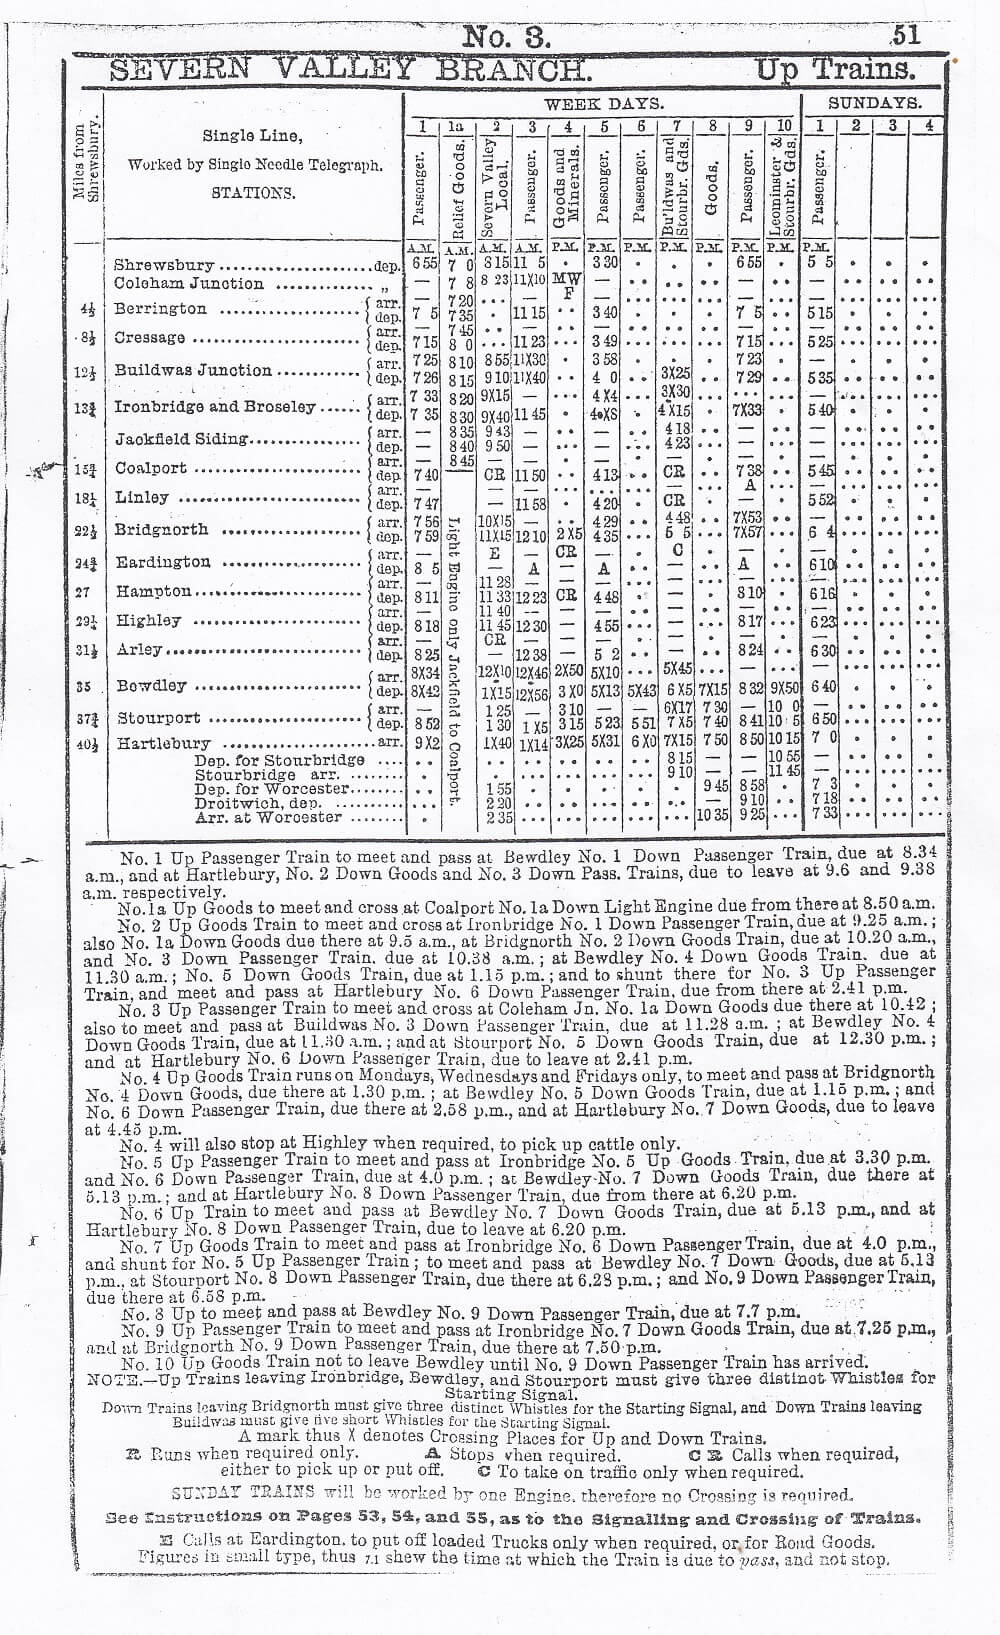 1876 timetable page 51.jpg